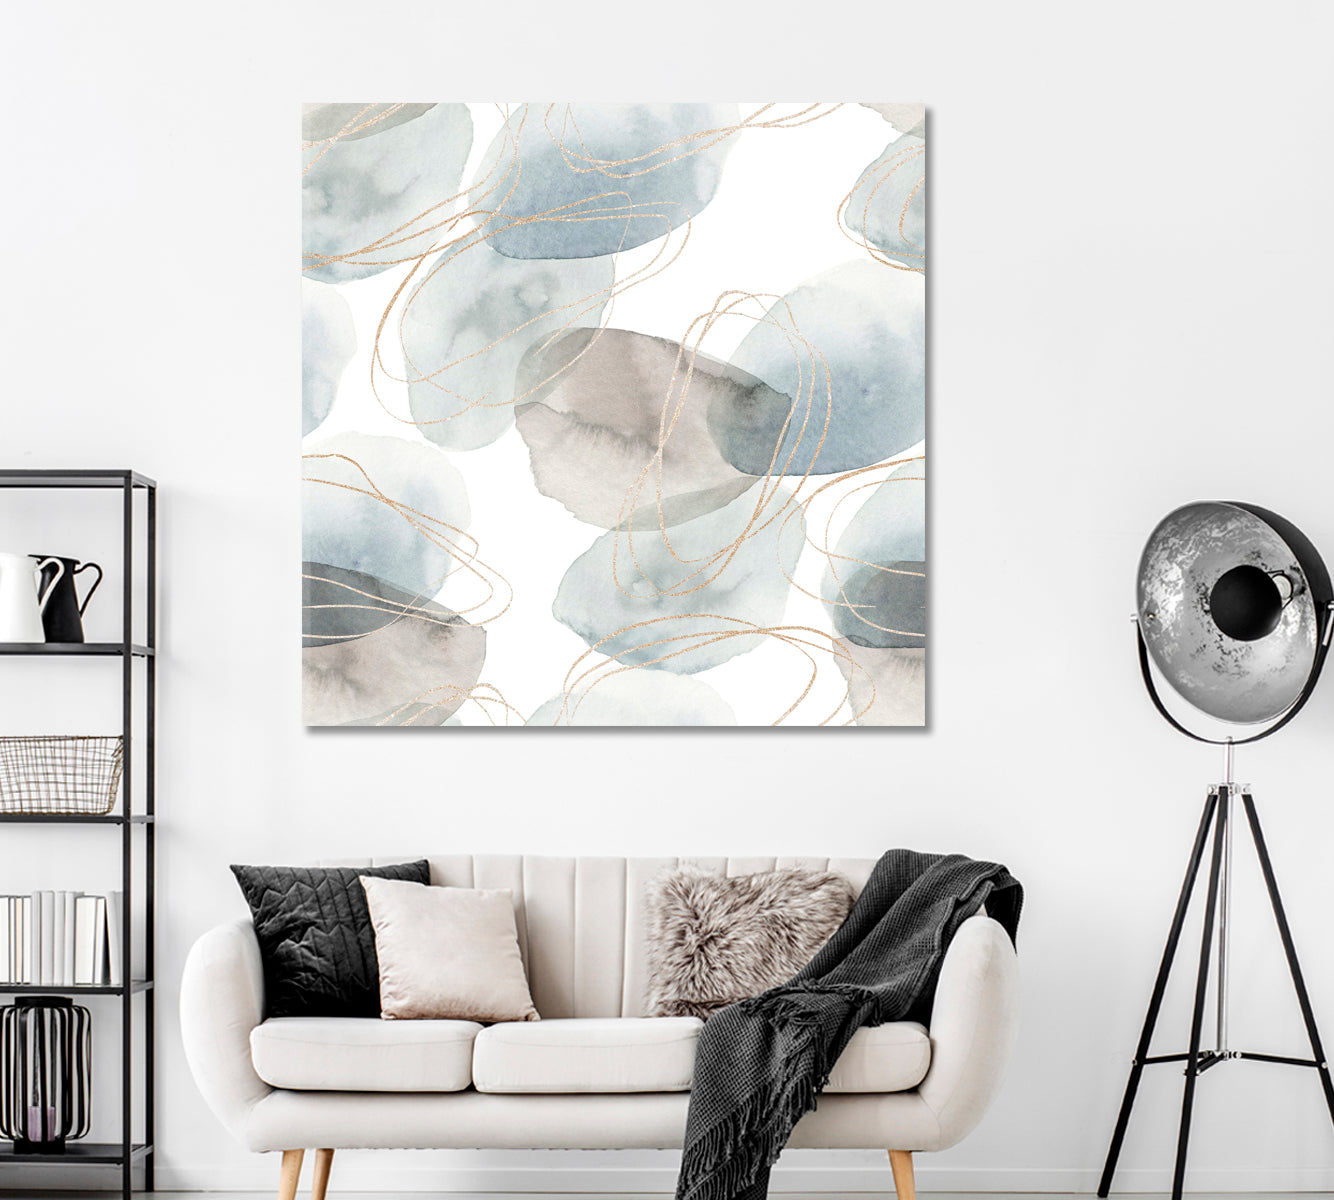 Abstract Nordic Pattern Canvas Print ArtLexy   